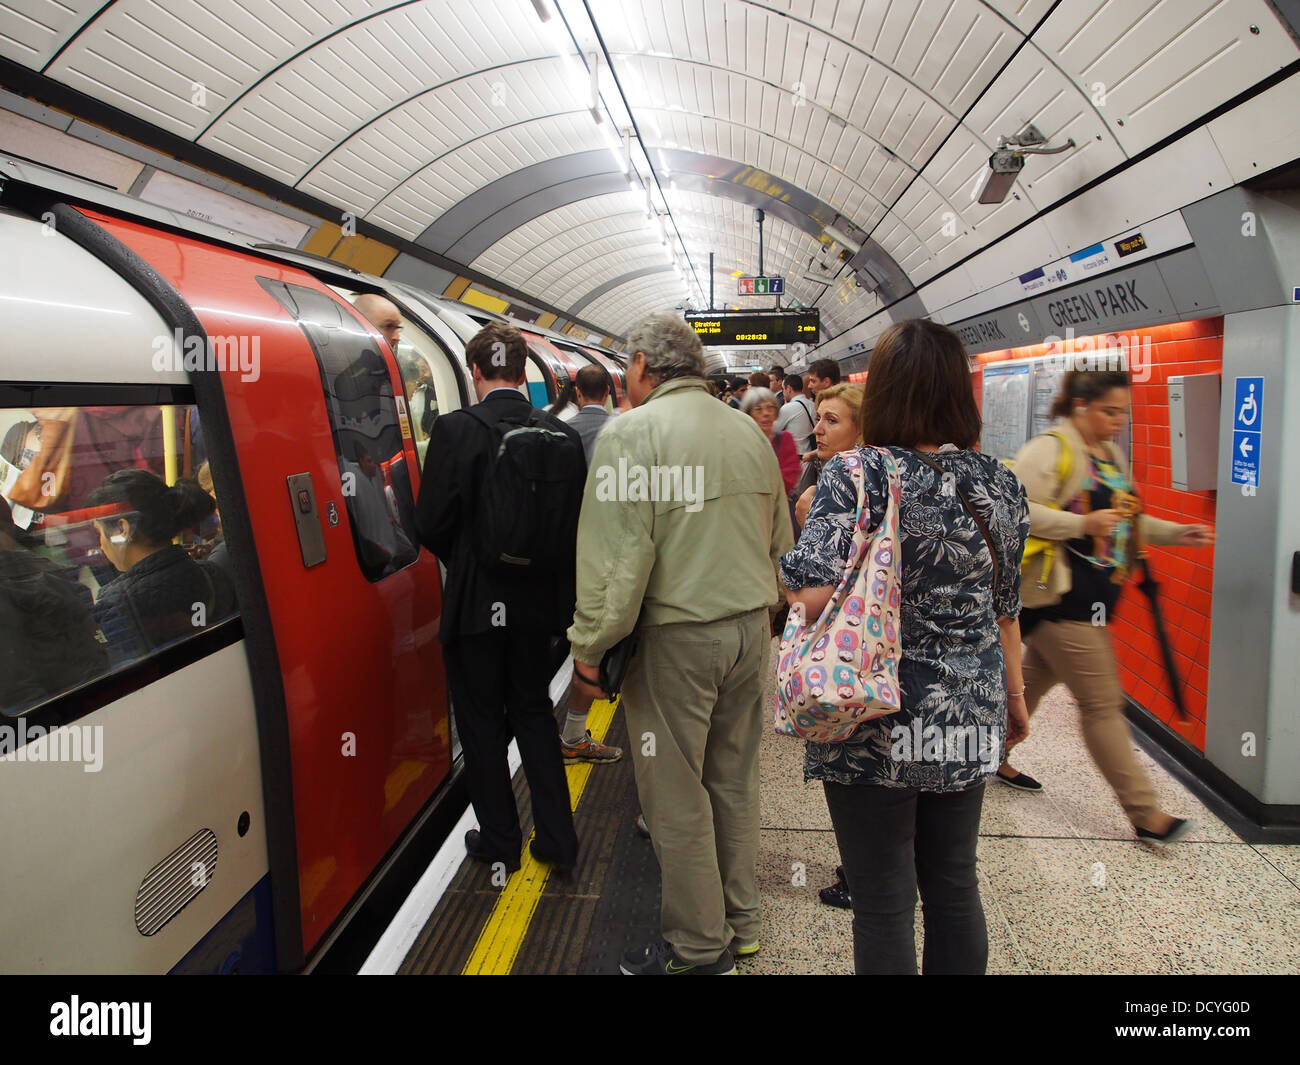 London underground, crowded with commuters Stock Photo